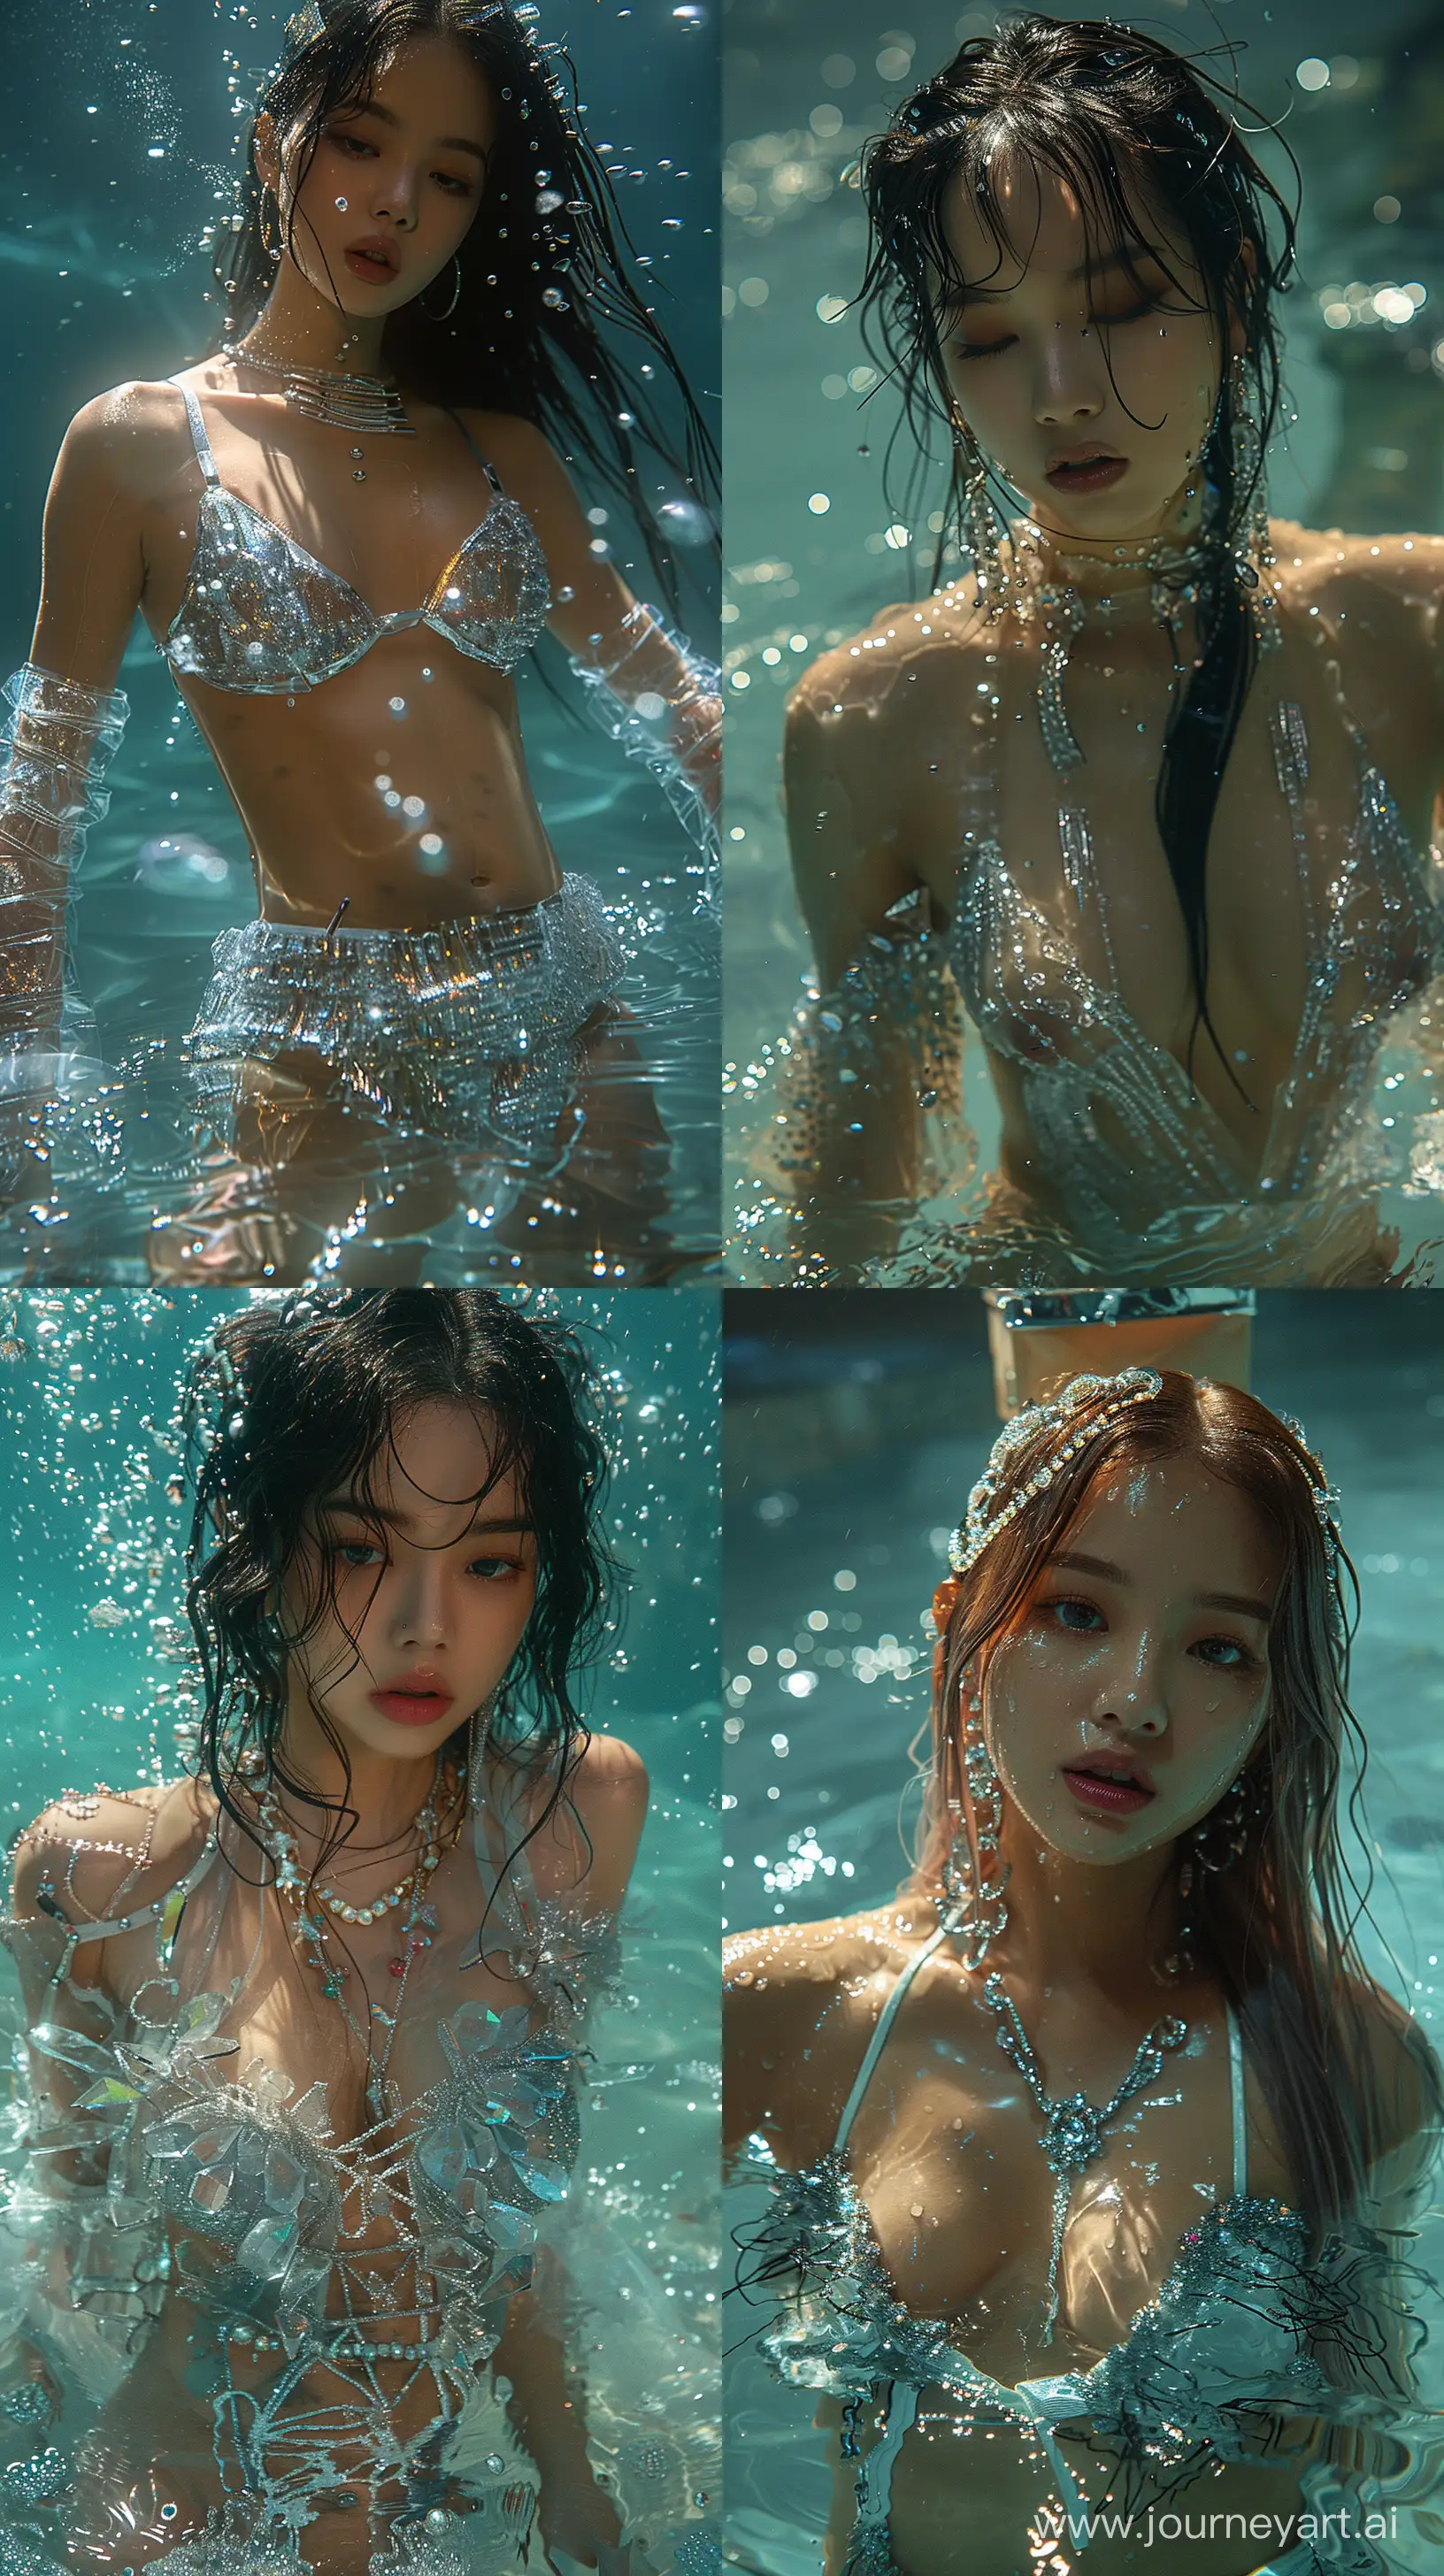 Mysterious-Nocturnal-Scene-Blackpinks-Jennie-Paints-Underwater-with-Crystal-Outfit-and-Mannequin-Property